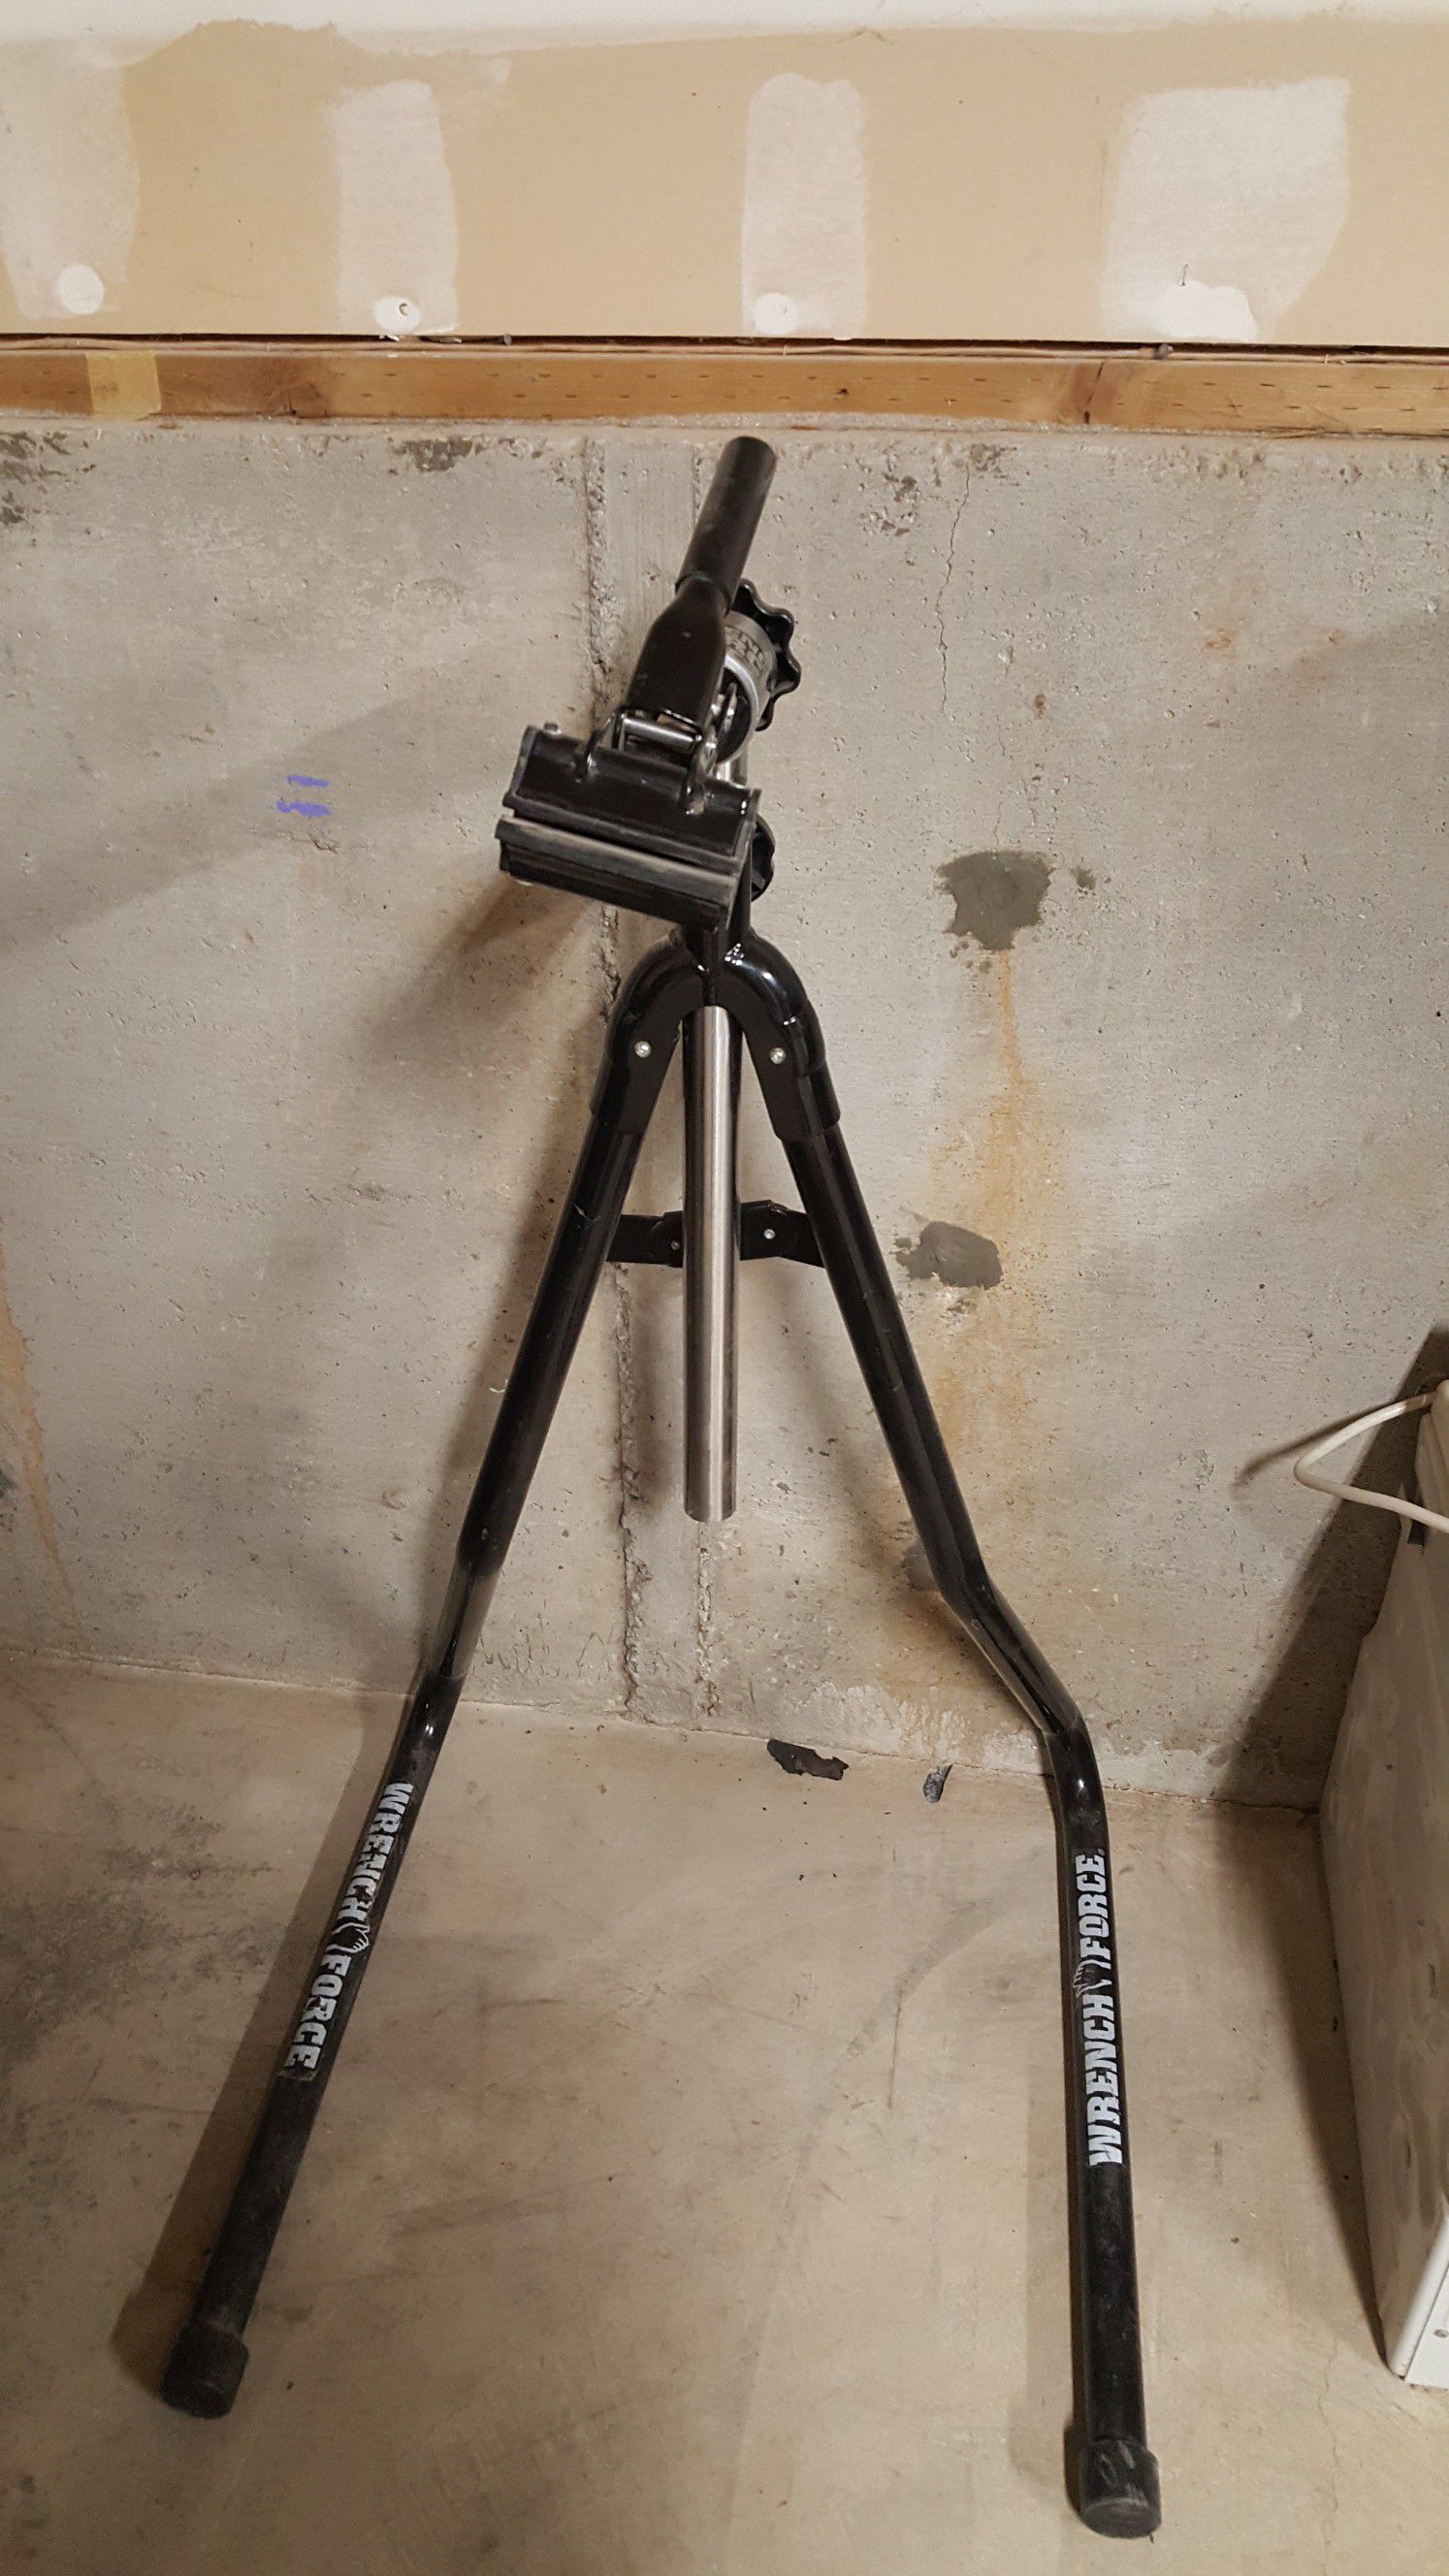 Wrench Force Bike Repair Stand